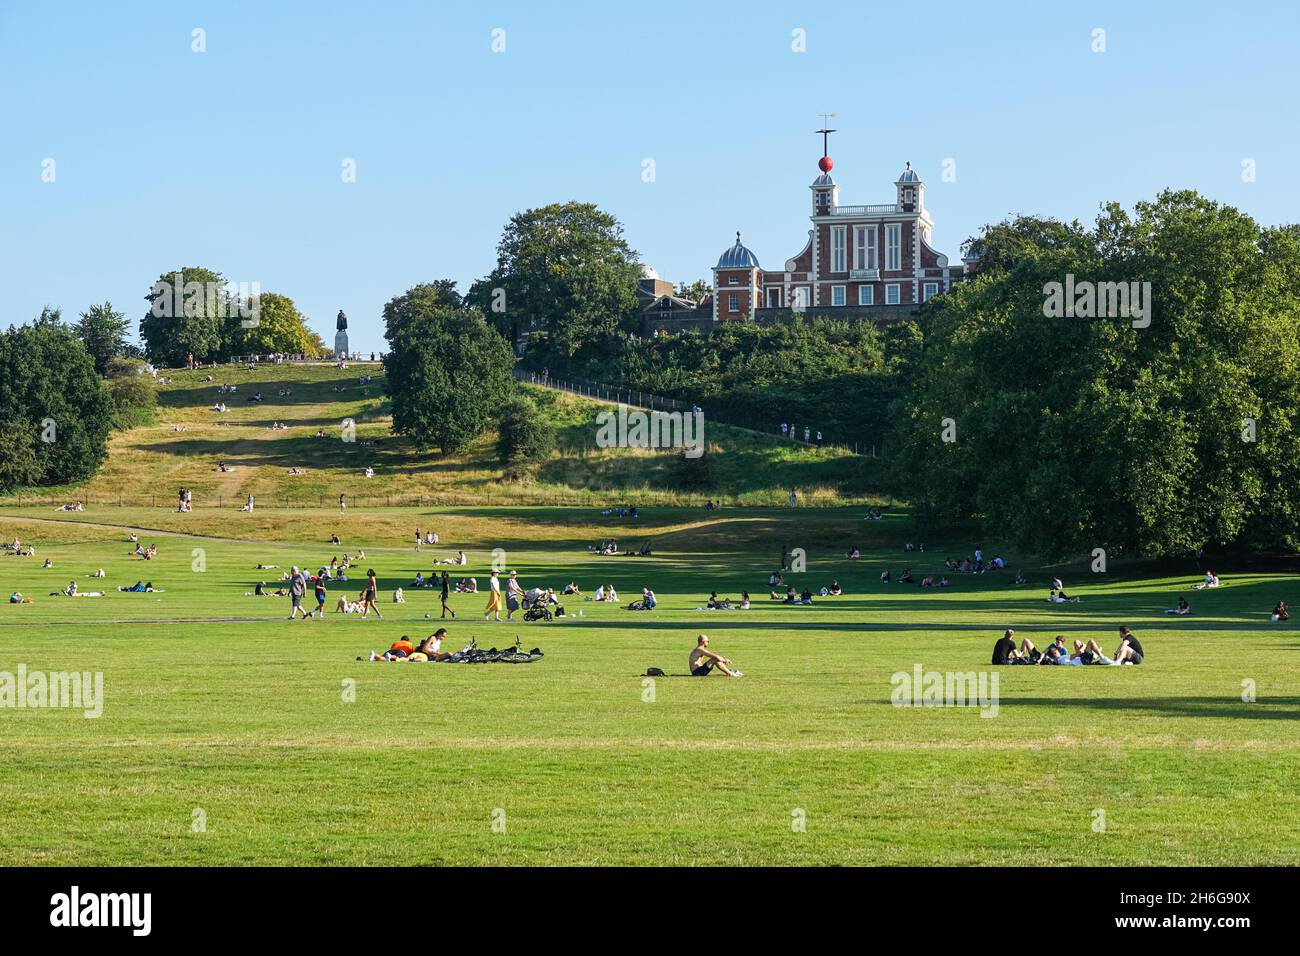 People enjoying sunny day in Greenwich Park with the Royal Observatory in the background, London, England, United Kingdom, UK Stock Photo